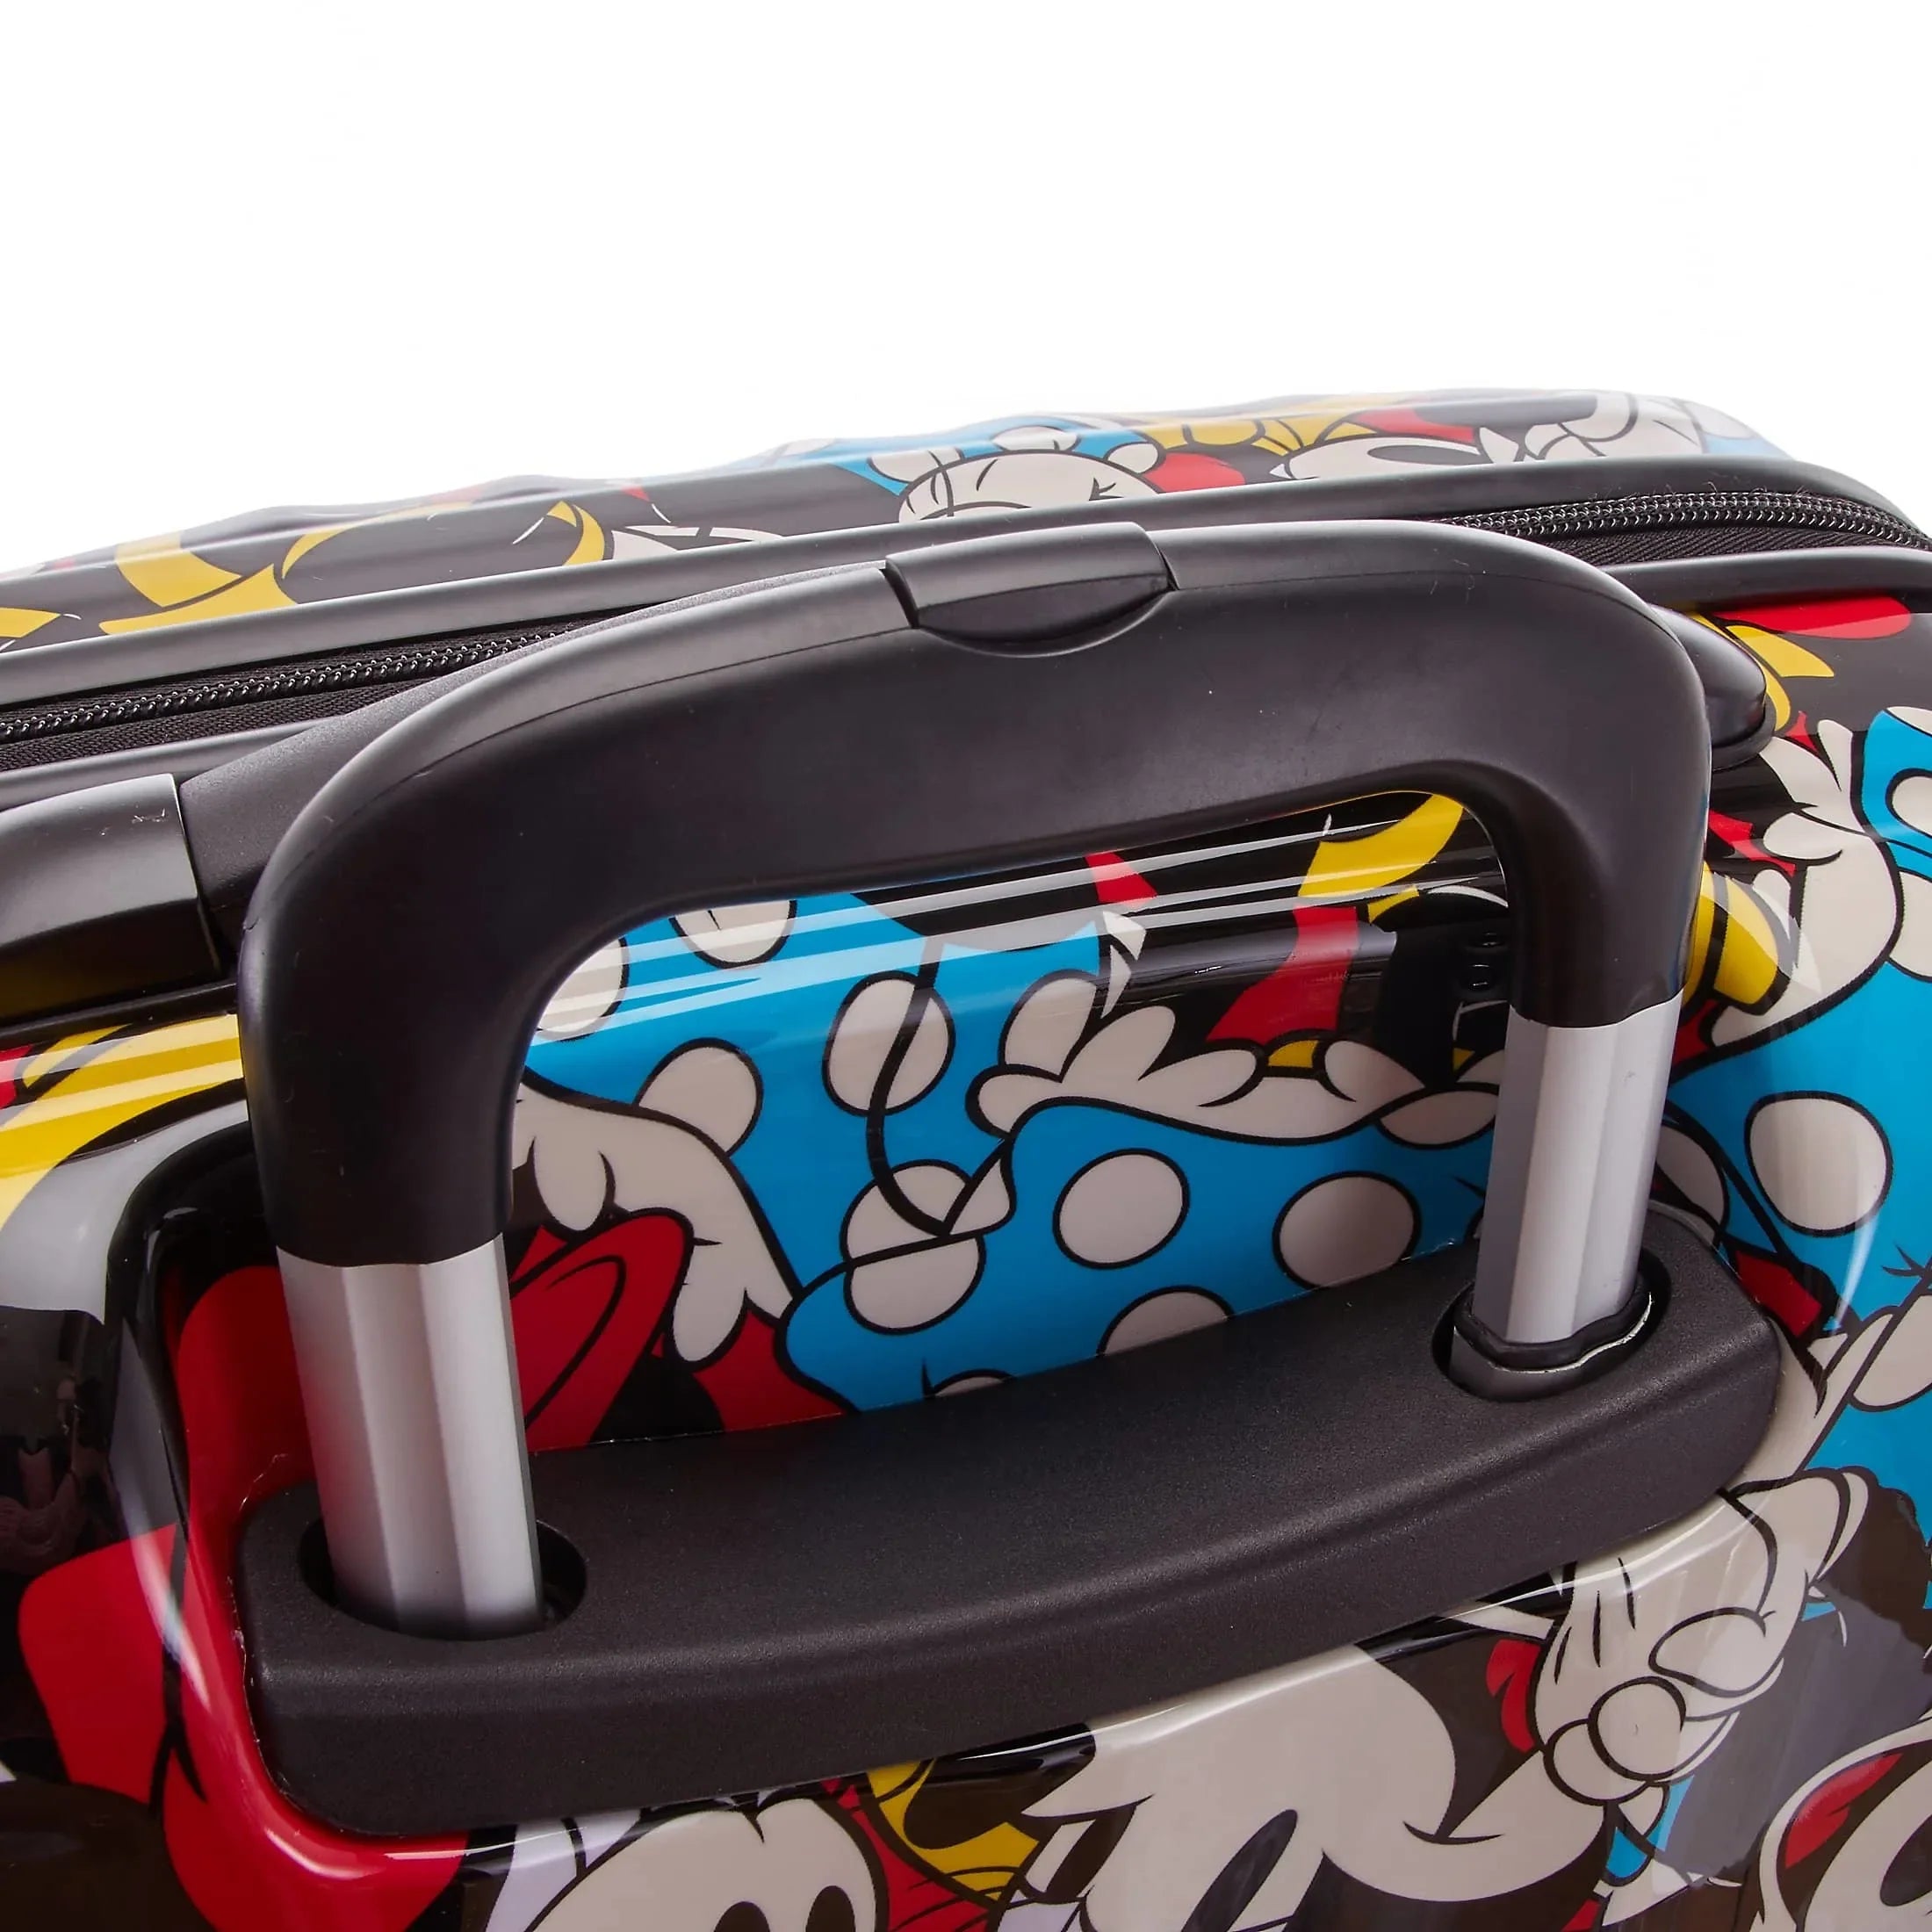 American Tourister Disney Legends Alfatwist 2.0 trolley cabine 4 roues 55 cm - Mickey Mouse à pois